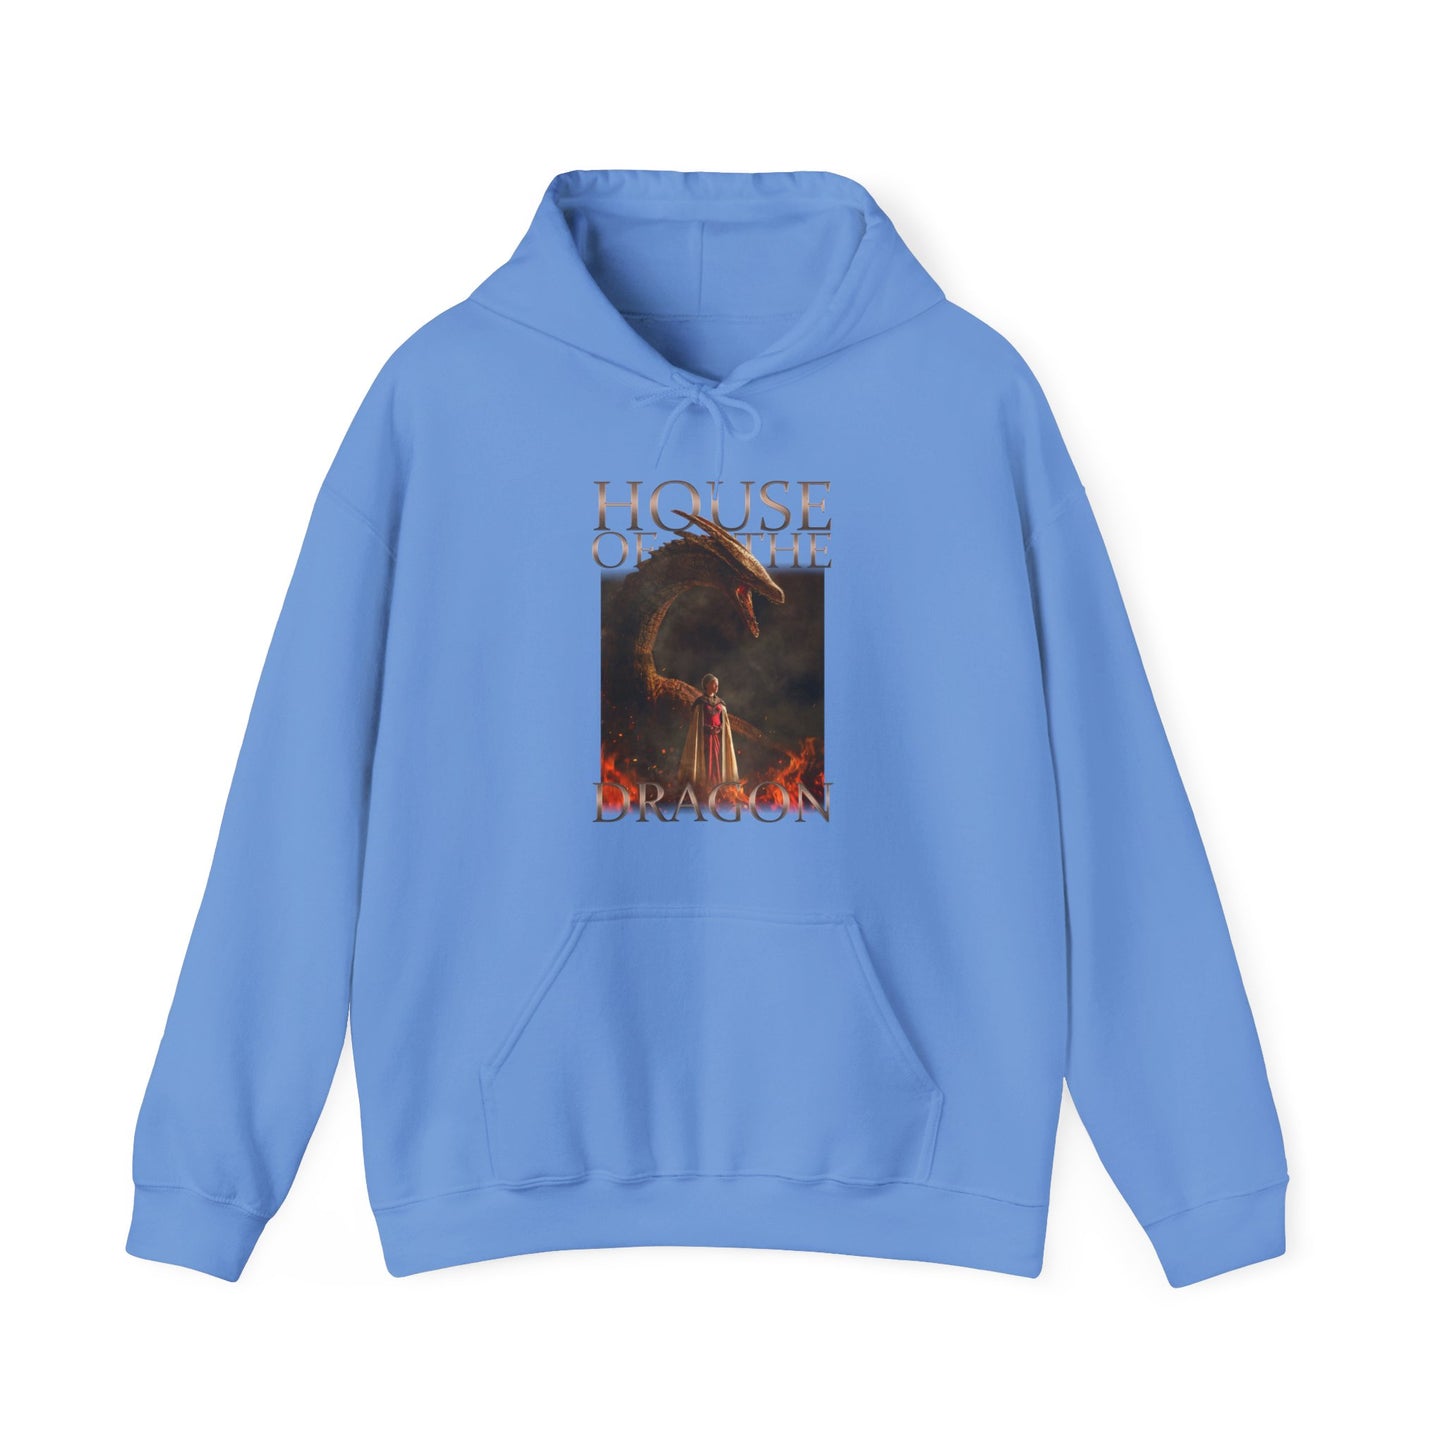 House Of The Dragon High Quality Unisex Heavy Blend™ Hoodie